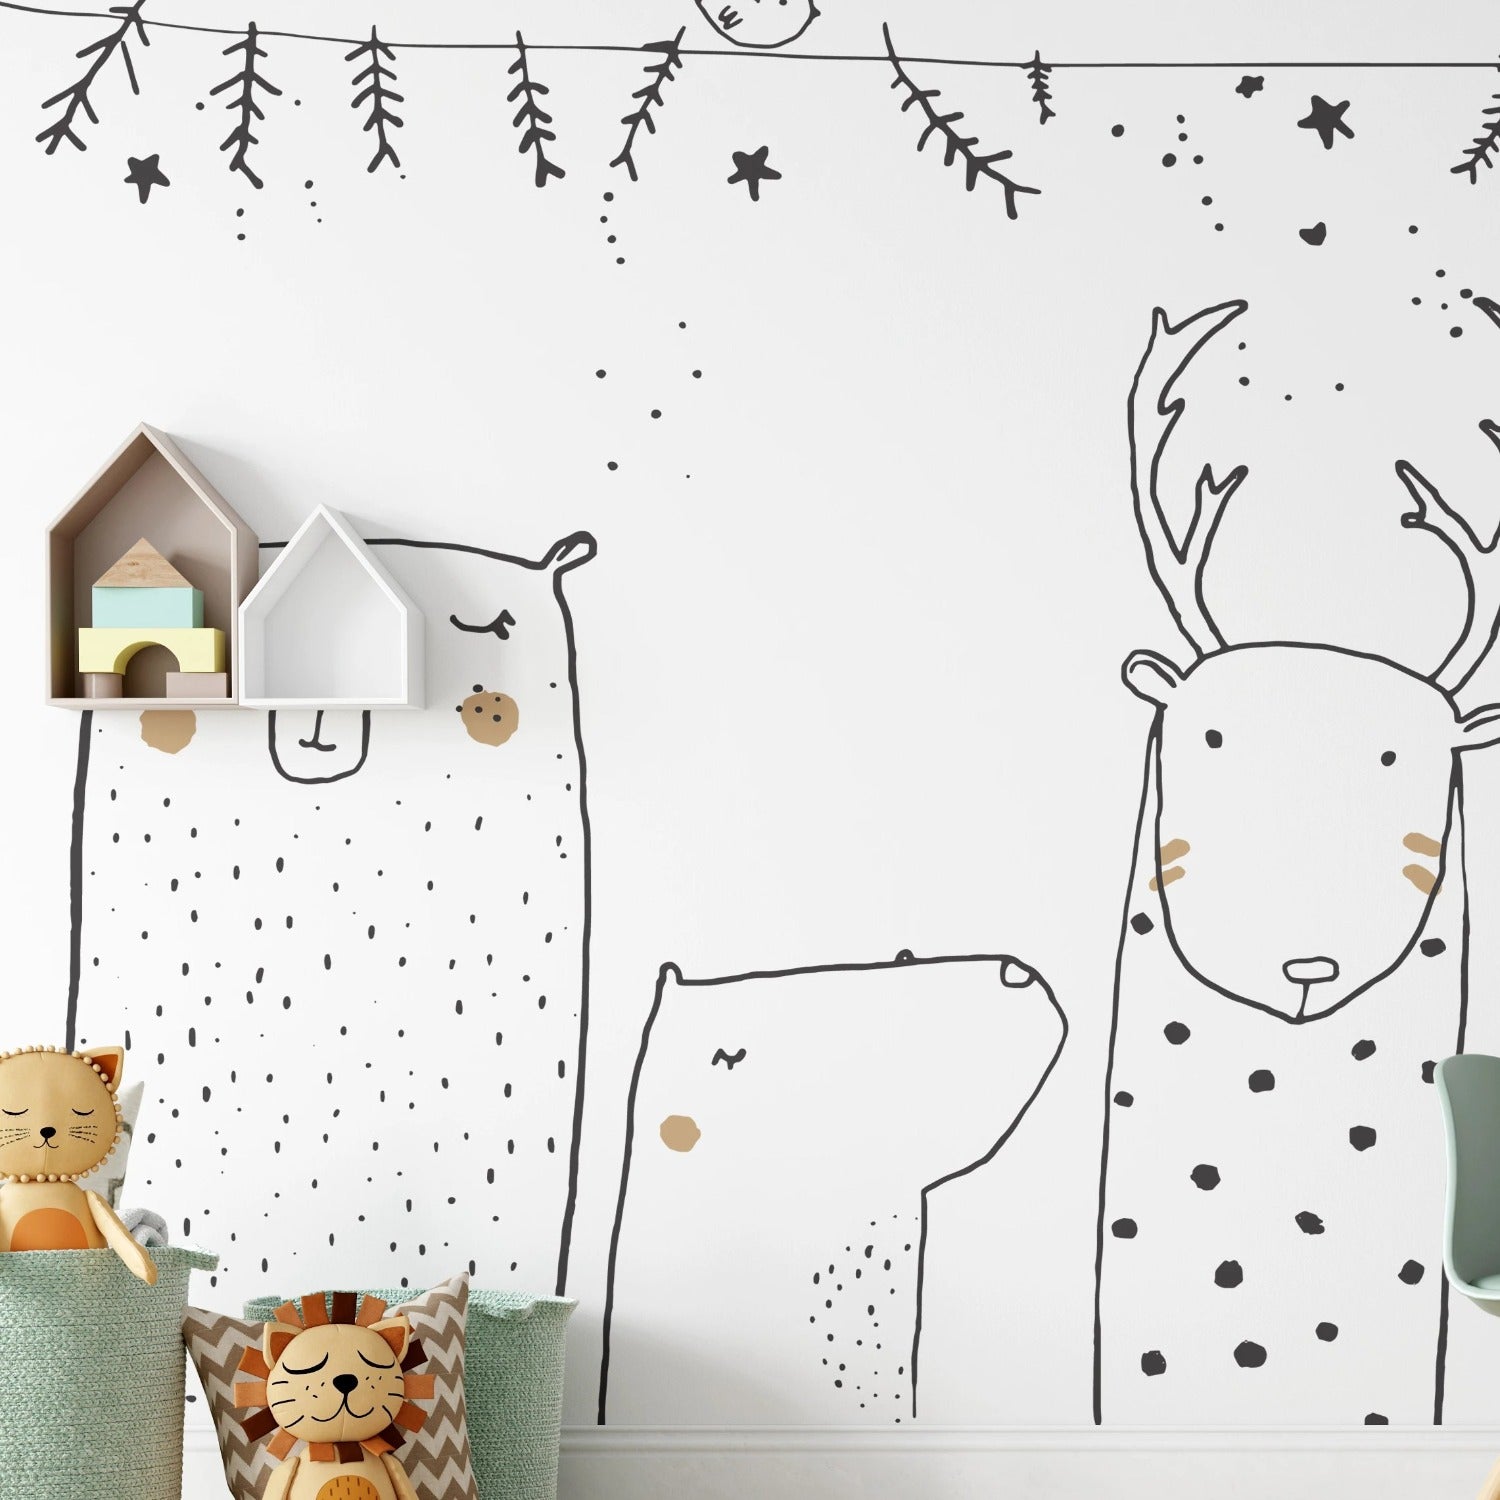 Whimsical children's wallpaper with cartoon bear and deer, perfect for a nursery or playroom